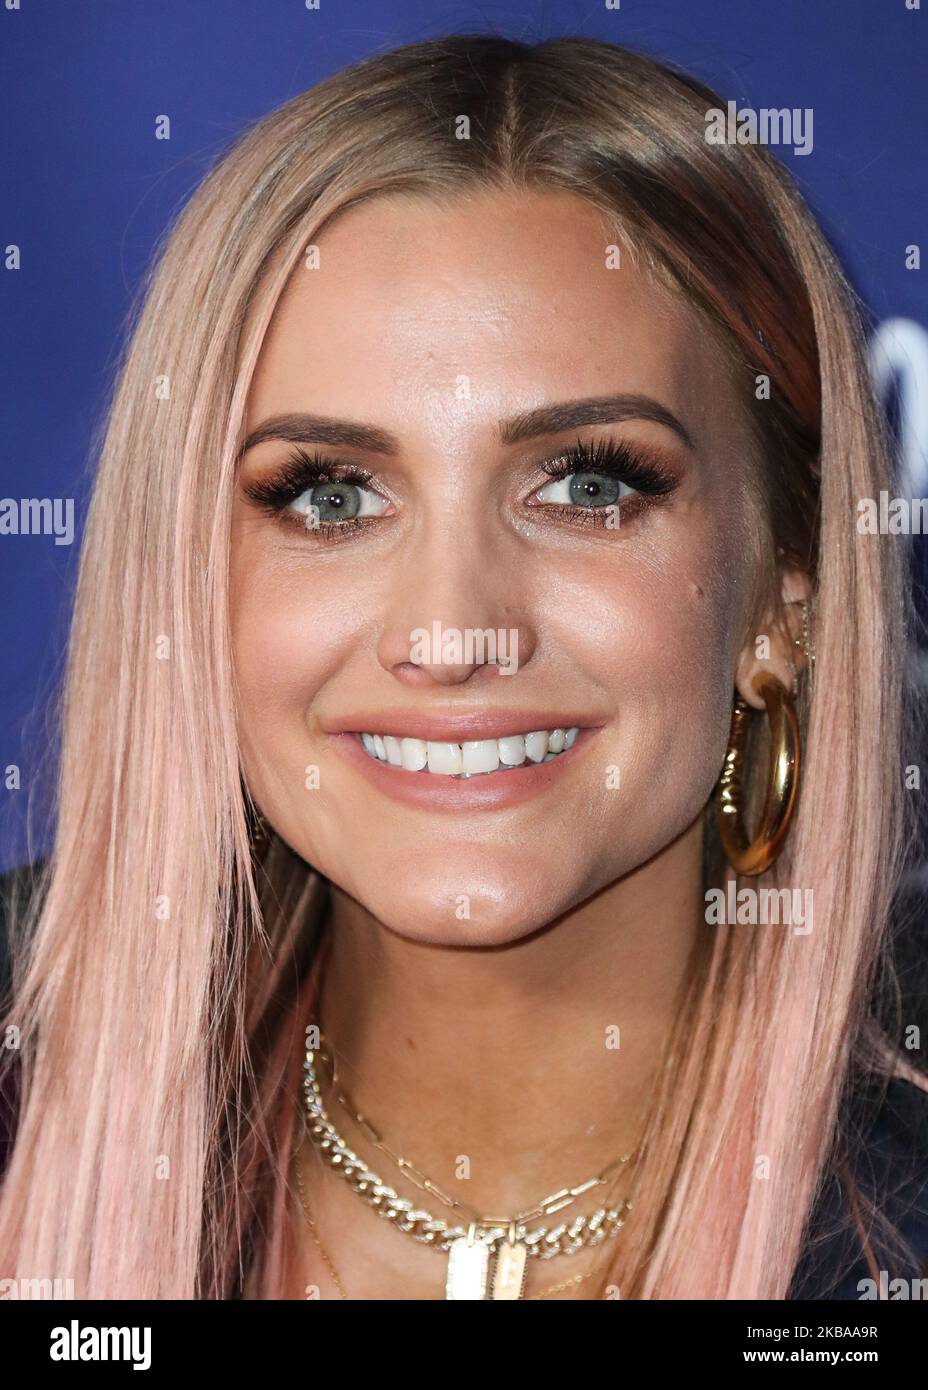 HOLLYWOOD, LOS ANGELES, CALIFORNIA, USA - NOVEMBER 07: Ashlee Simpson arrives at the World Premiere Of Disney's 'Frozen 2' held at the Dolby Theatre on November 7, 2019 in Hollywood, Los Angeles, California, United States. (Photo by Xavier Collin/Image Press Agency/NurPhoto) Stock Photo